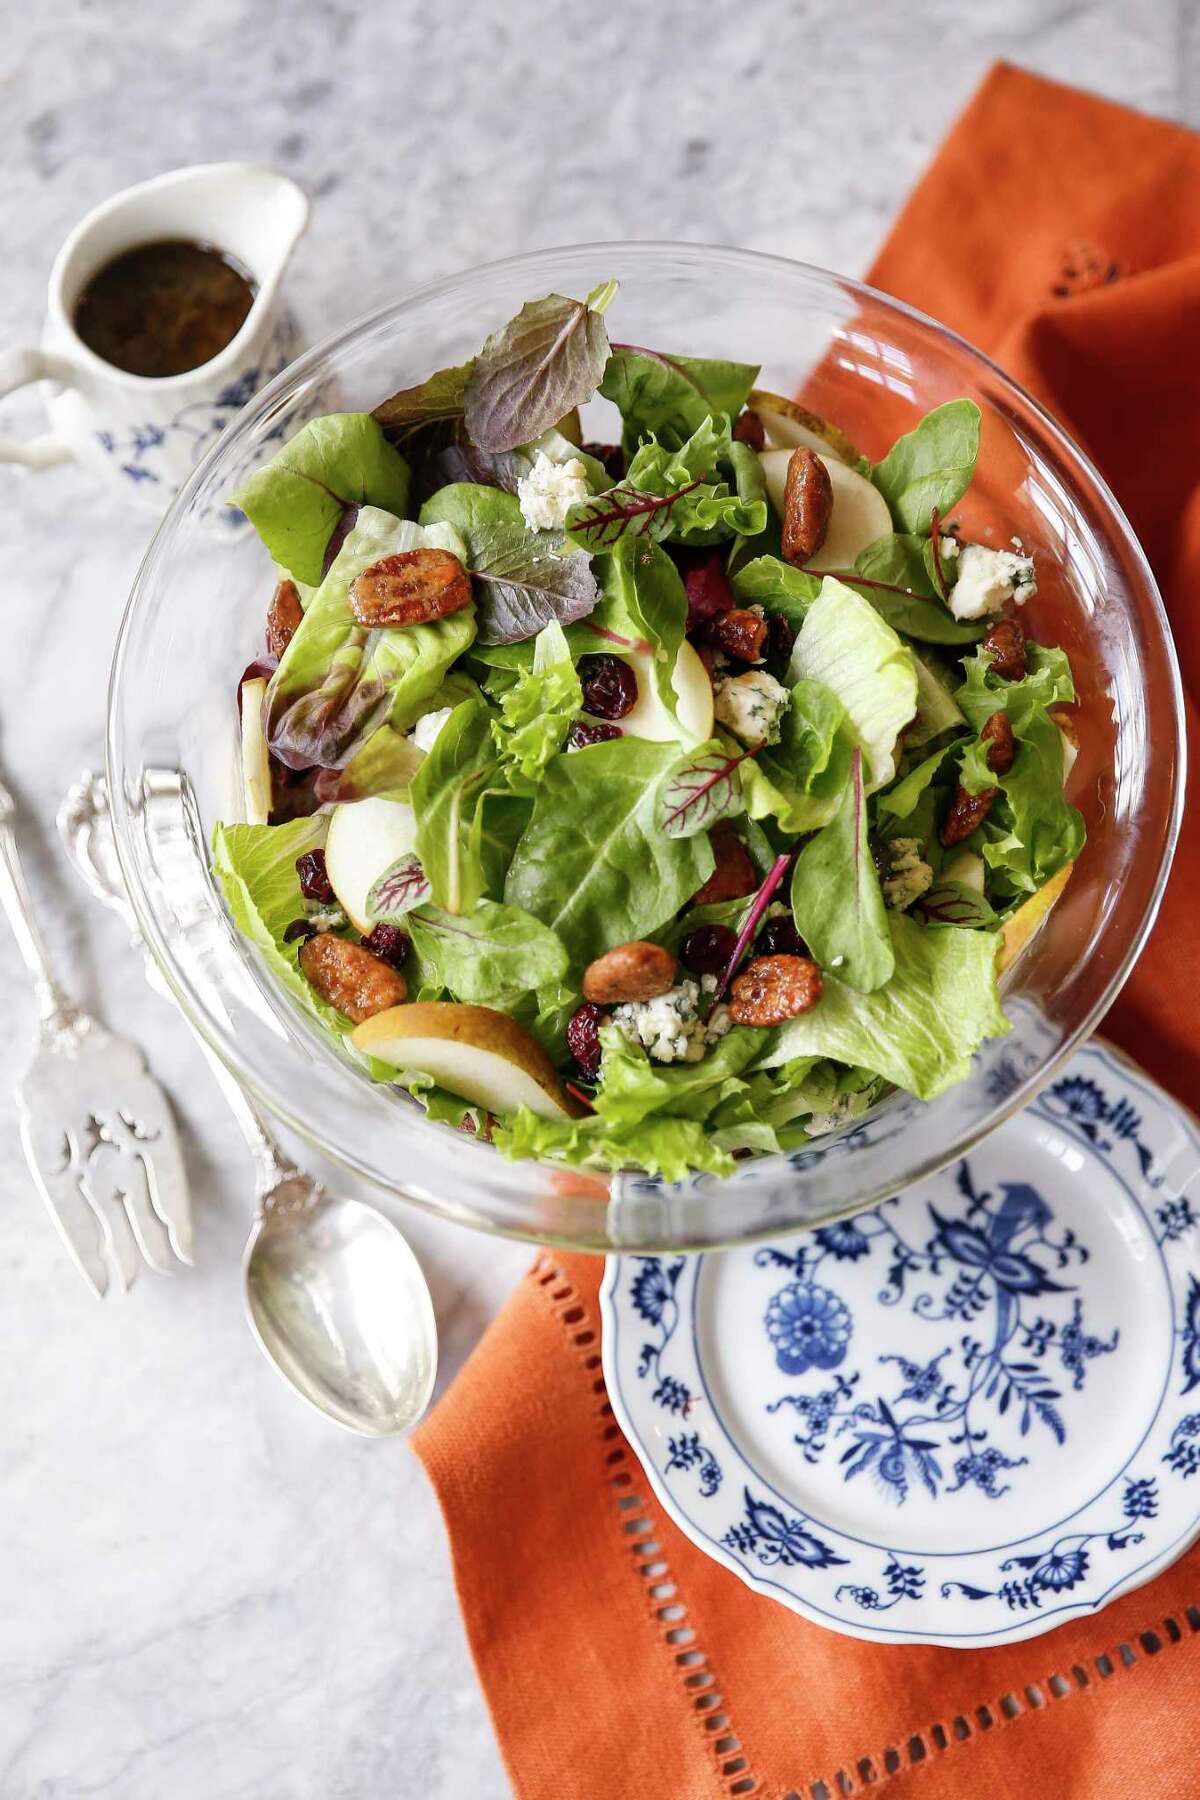 Fall Bounty Salad with Bosc pears, blue cheese and honey toasted pecans is from Treebeards restaurant.